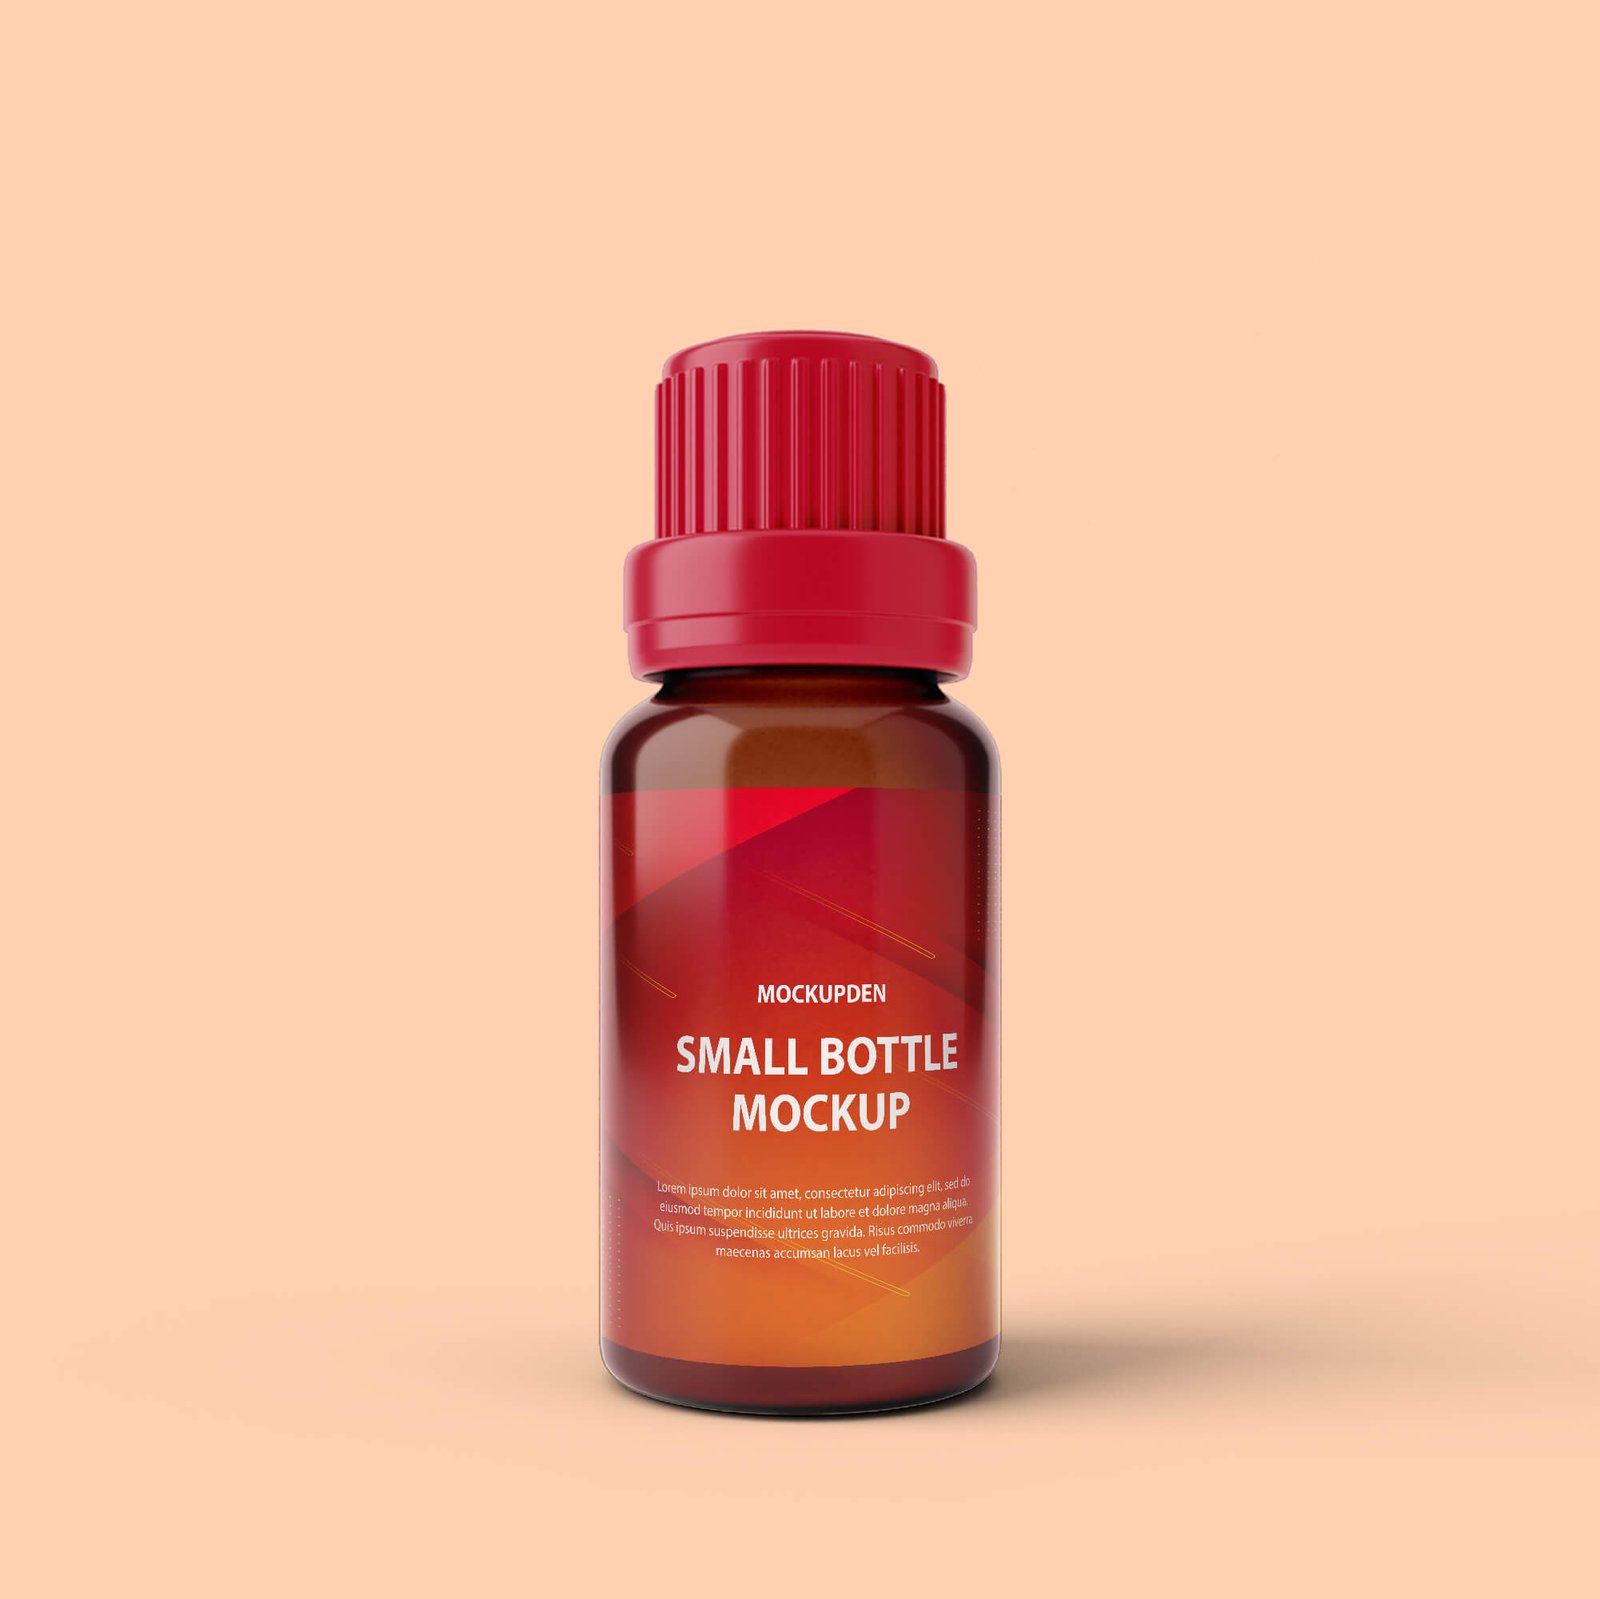 Design Free Small Bottle Mockup PSD Template